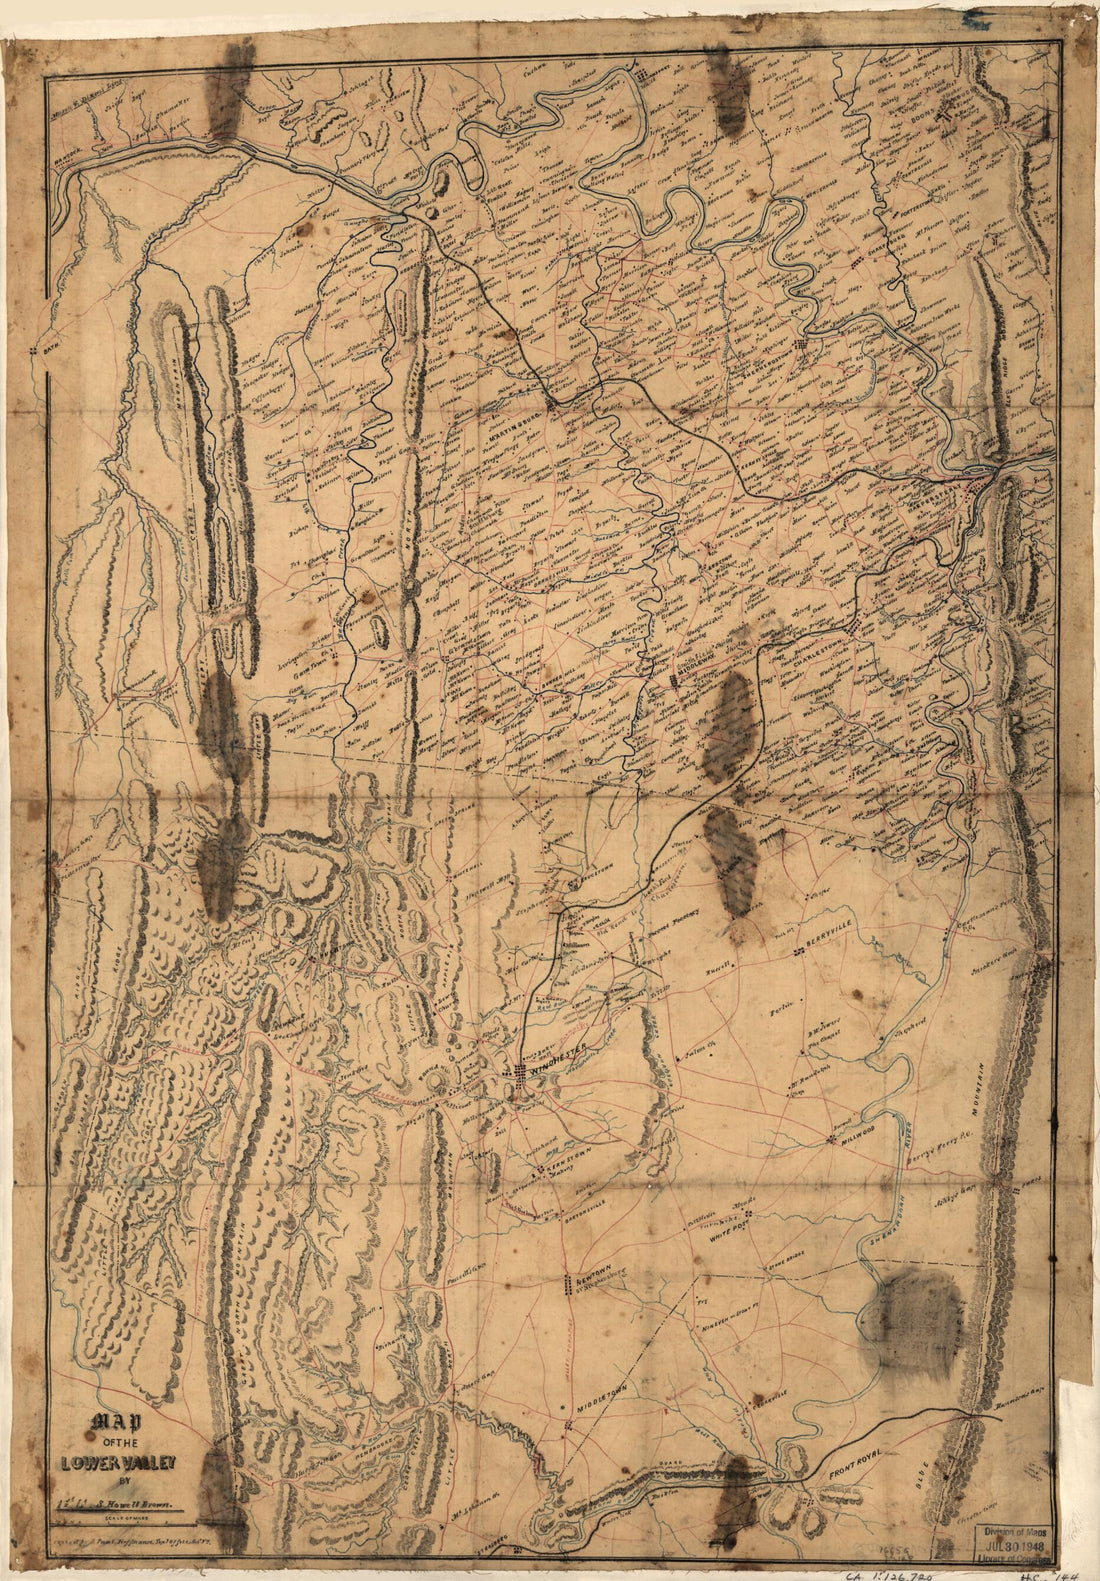 This old map of Map of the Lower Shenandoah Valley from 1863 was created by Samuel Howell Brown, J. Paul Hoffmann in 1863